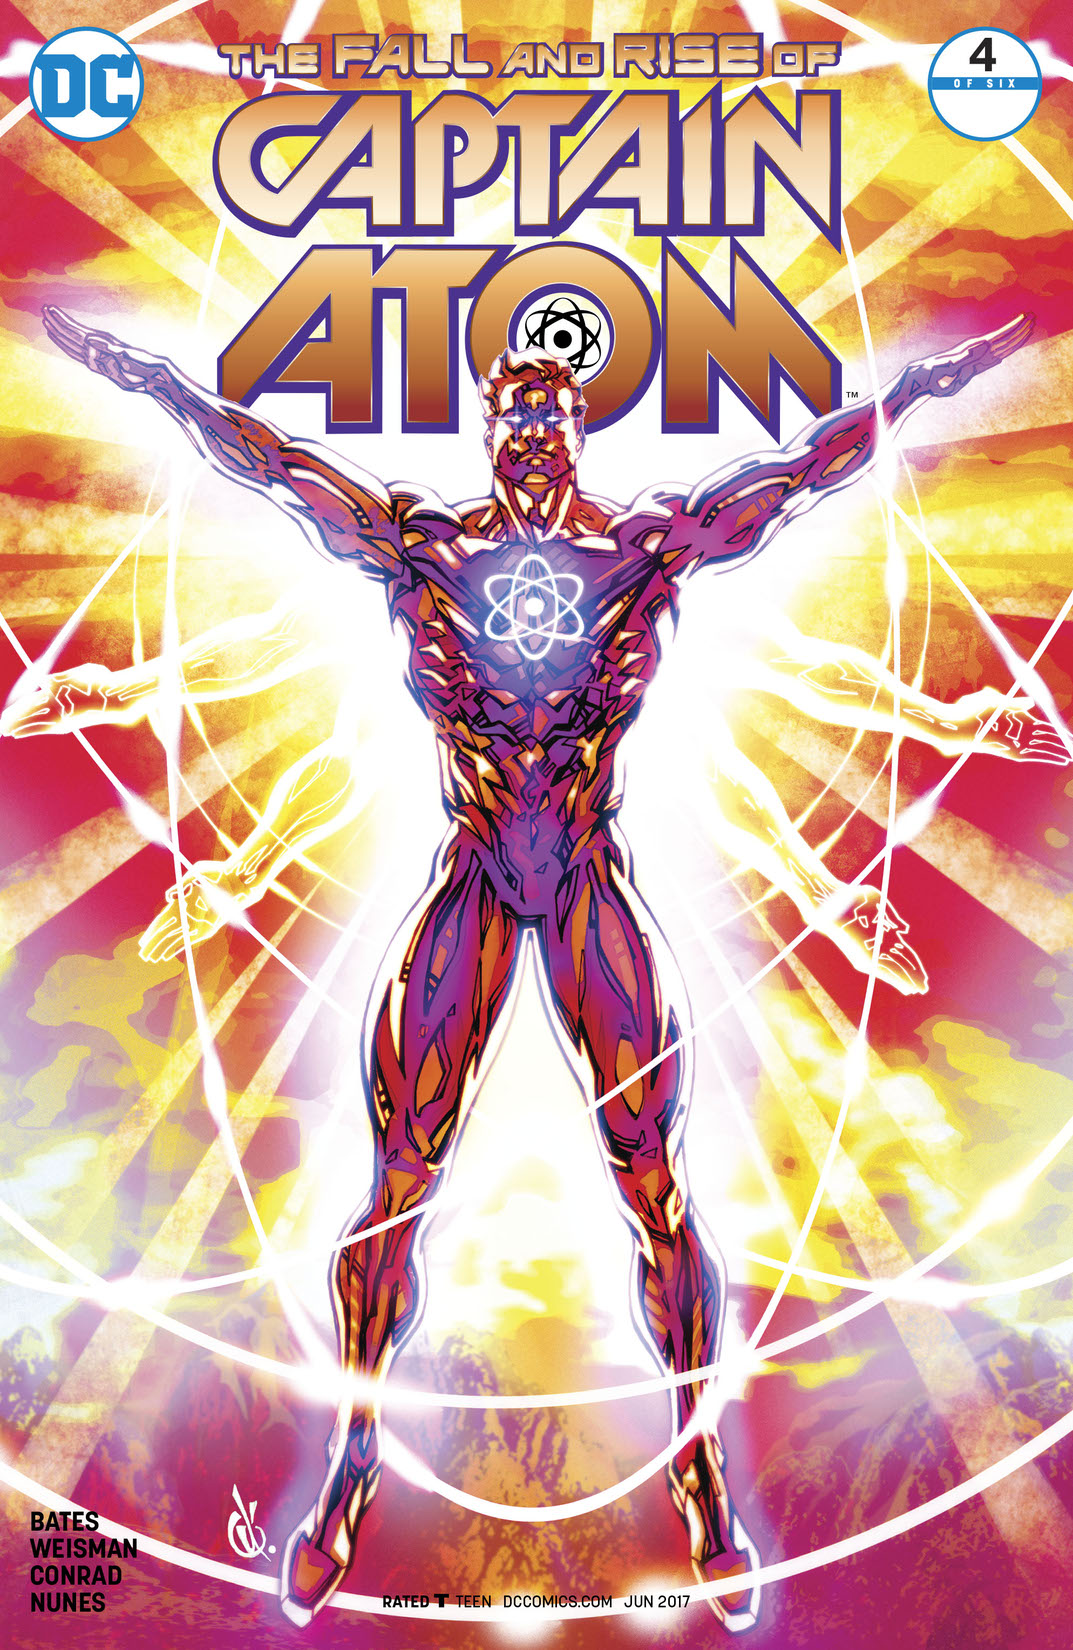 The Fall and Rise of Captain Atom #4 preview images